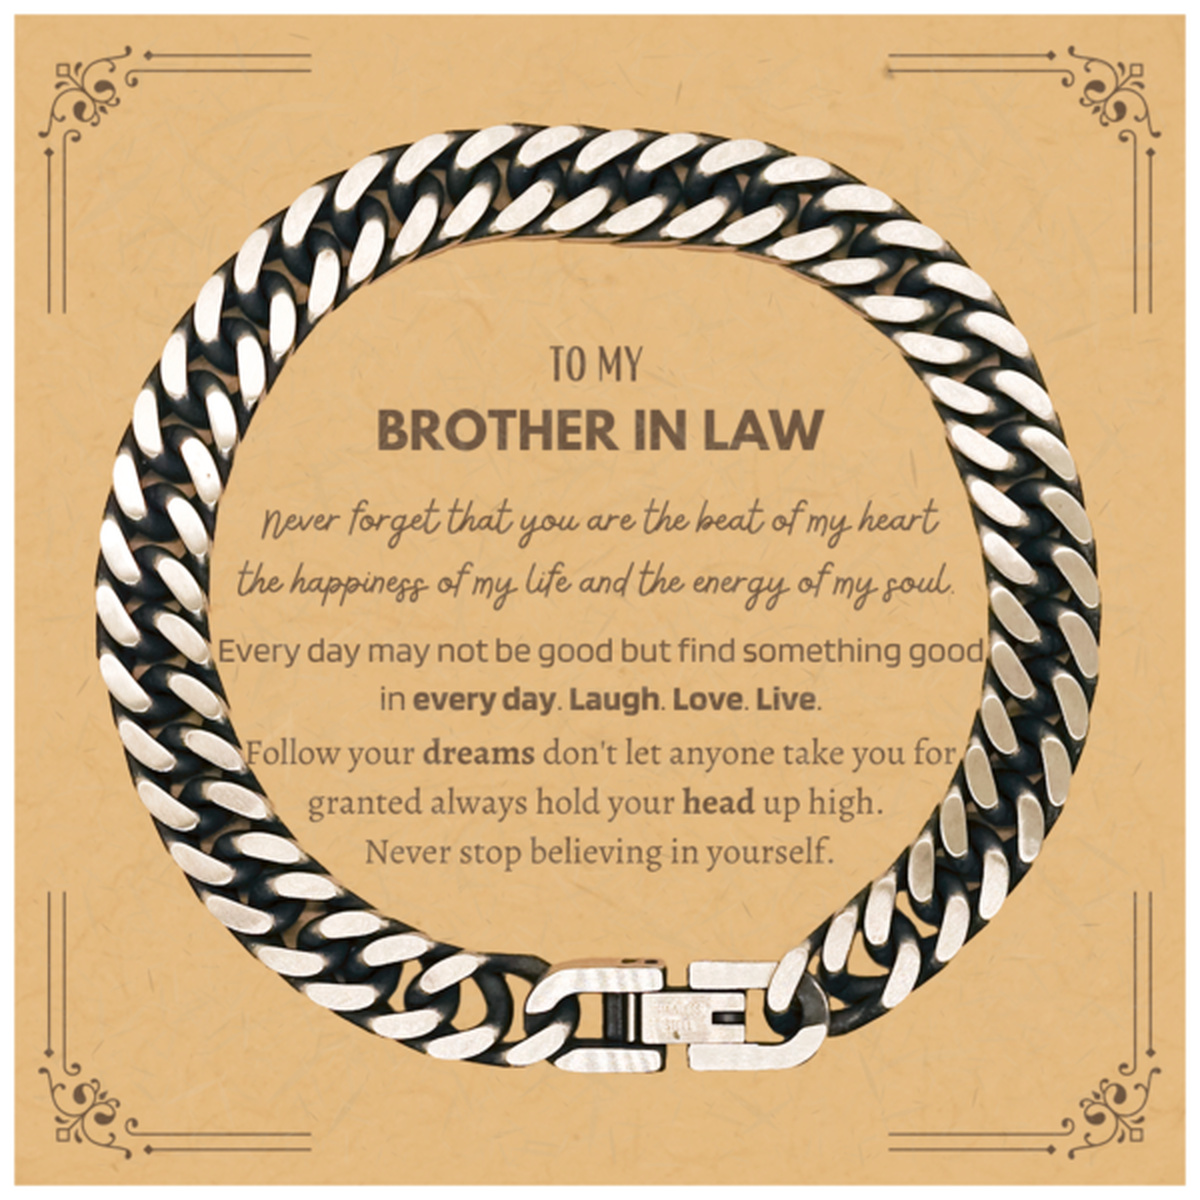 To My Brother In Law Message Card Gifts, Christmas Brother In Law Cuban Link Chain Bracelet Present, Birthday Unique Motivational For Brother In Law, To My Brother In Law Never forget that you are the beat of my heart the happiness of my life and the ener